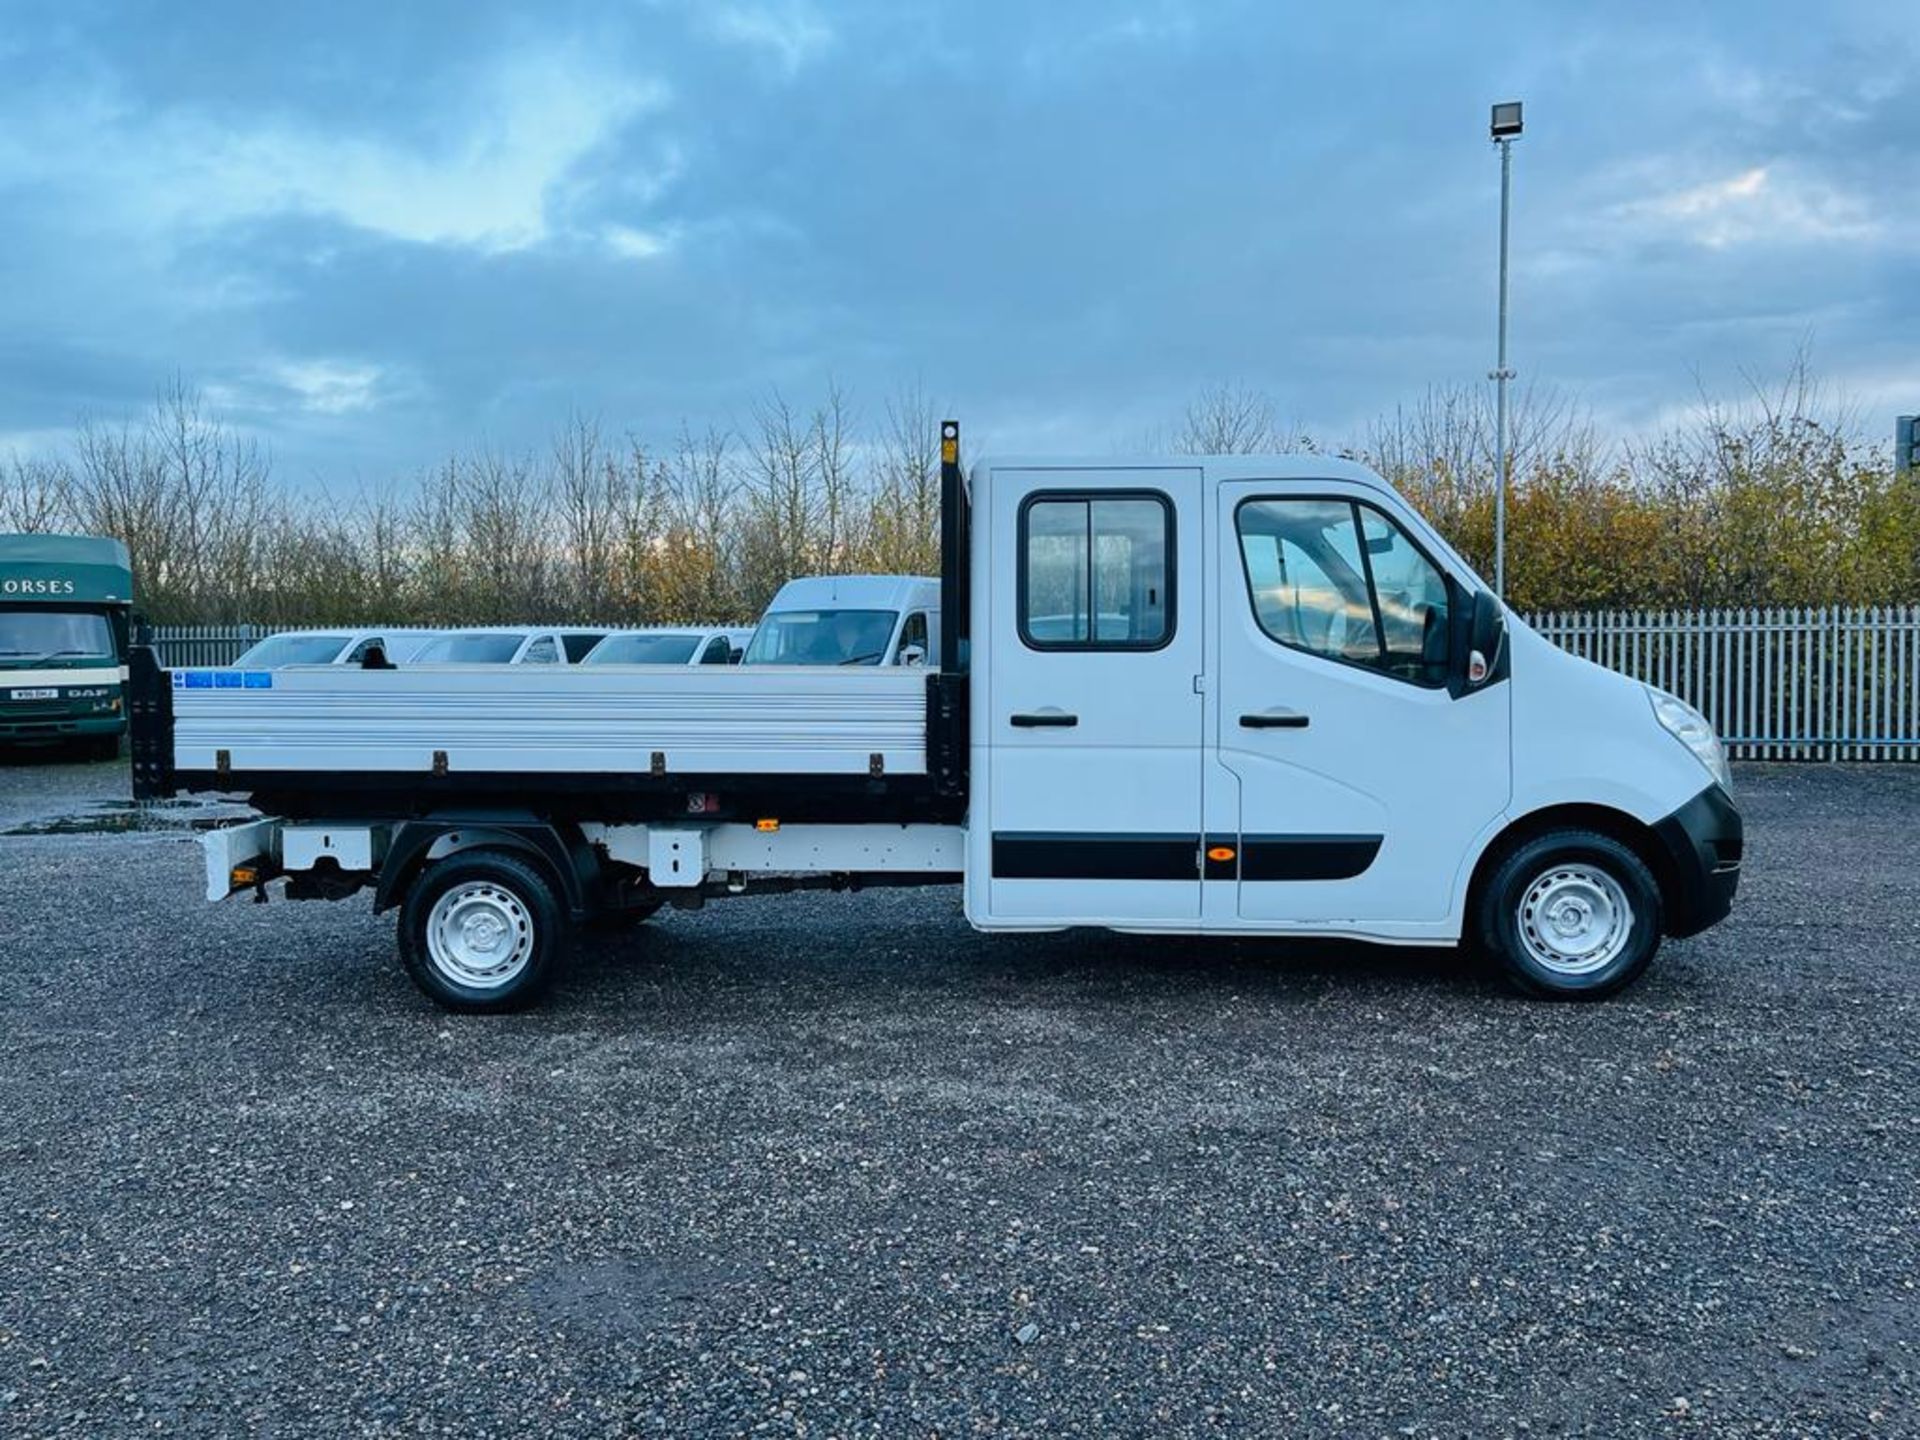 ** ON SALE ** Renault Master 2.3 DCI 125 LL35 DRW RWD L3 Crew Tipper 2013 '13 Reg' - Image 4 of 32